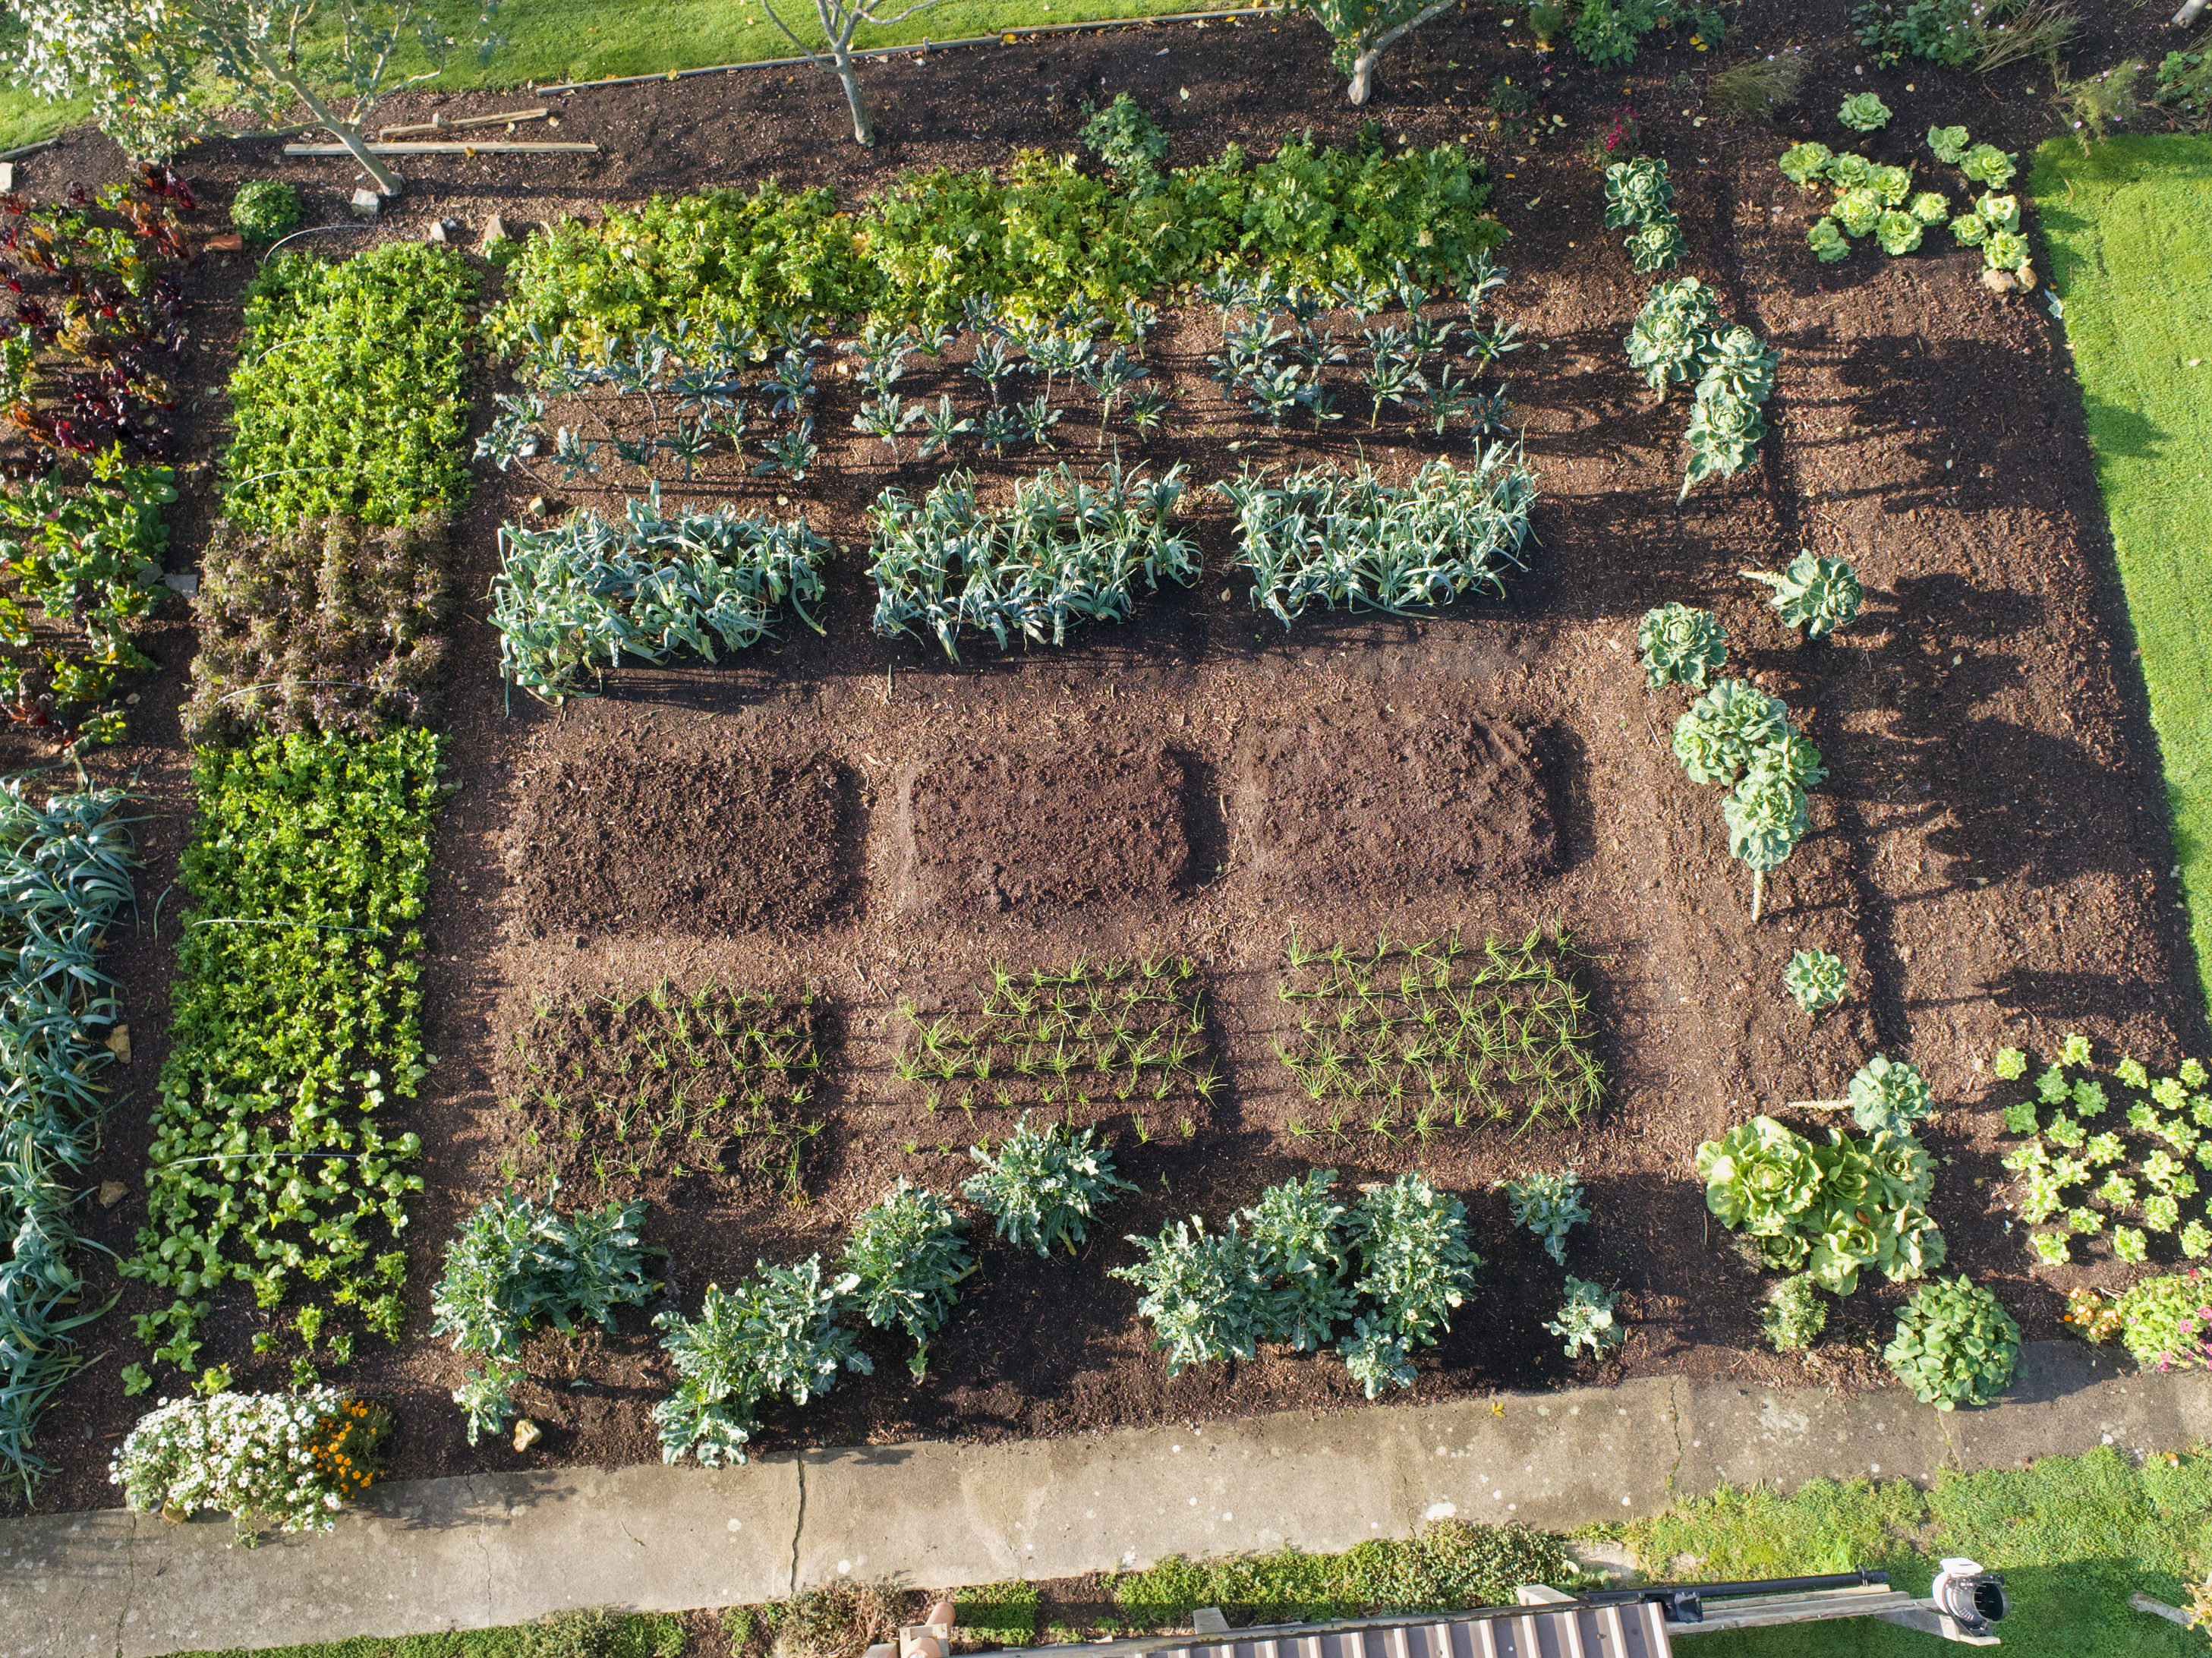 Planned vegetable garden (Charles Dowding/PA))